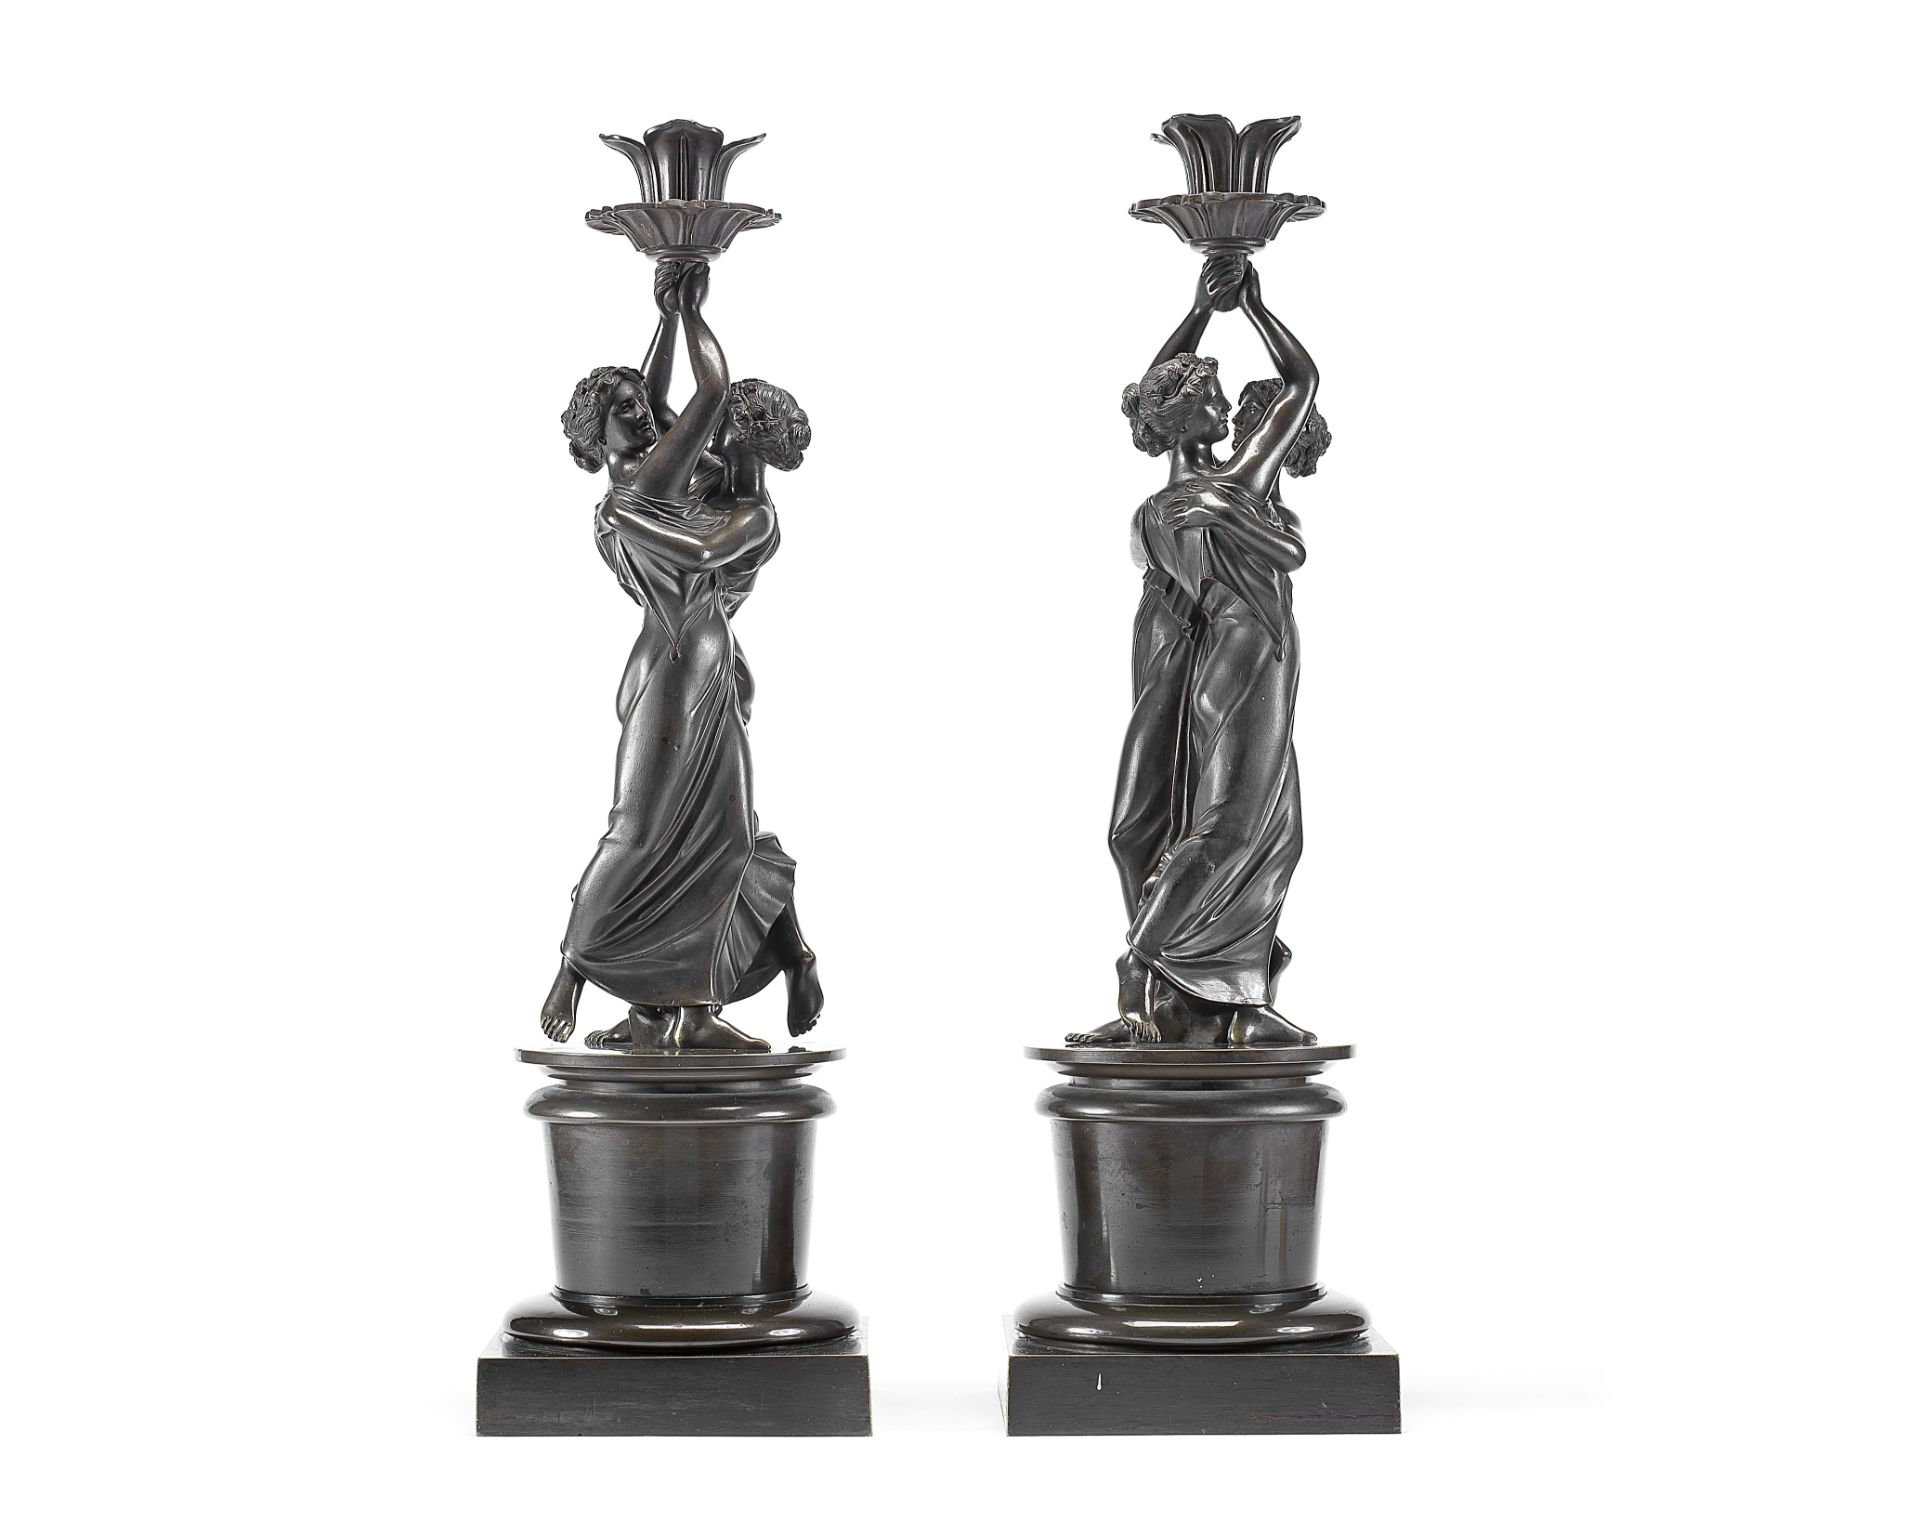 A pair of mid 19th century patinated bronze figural candlesticks (2)